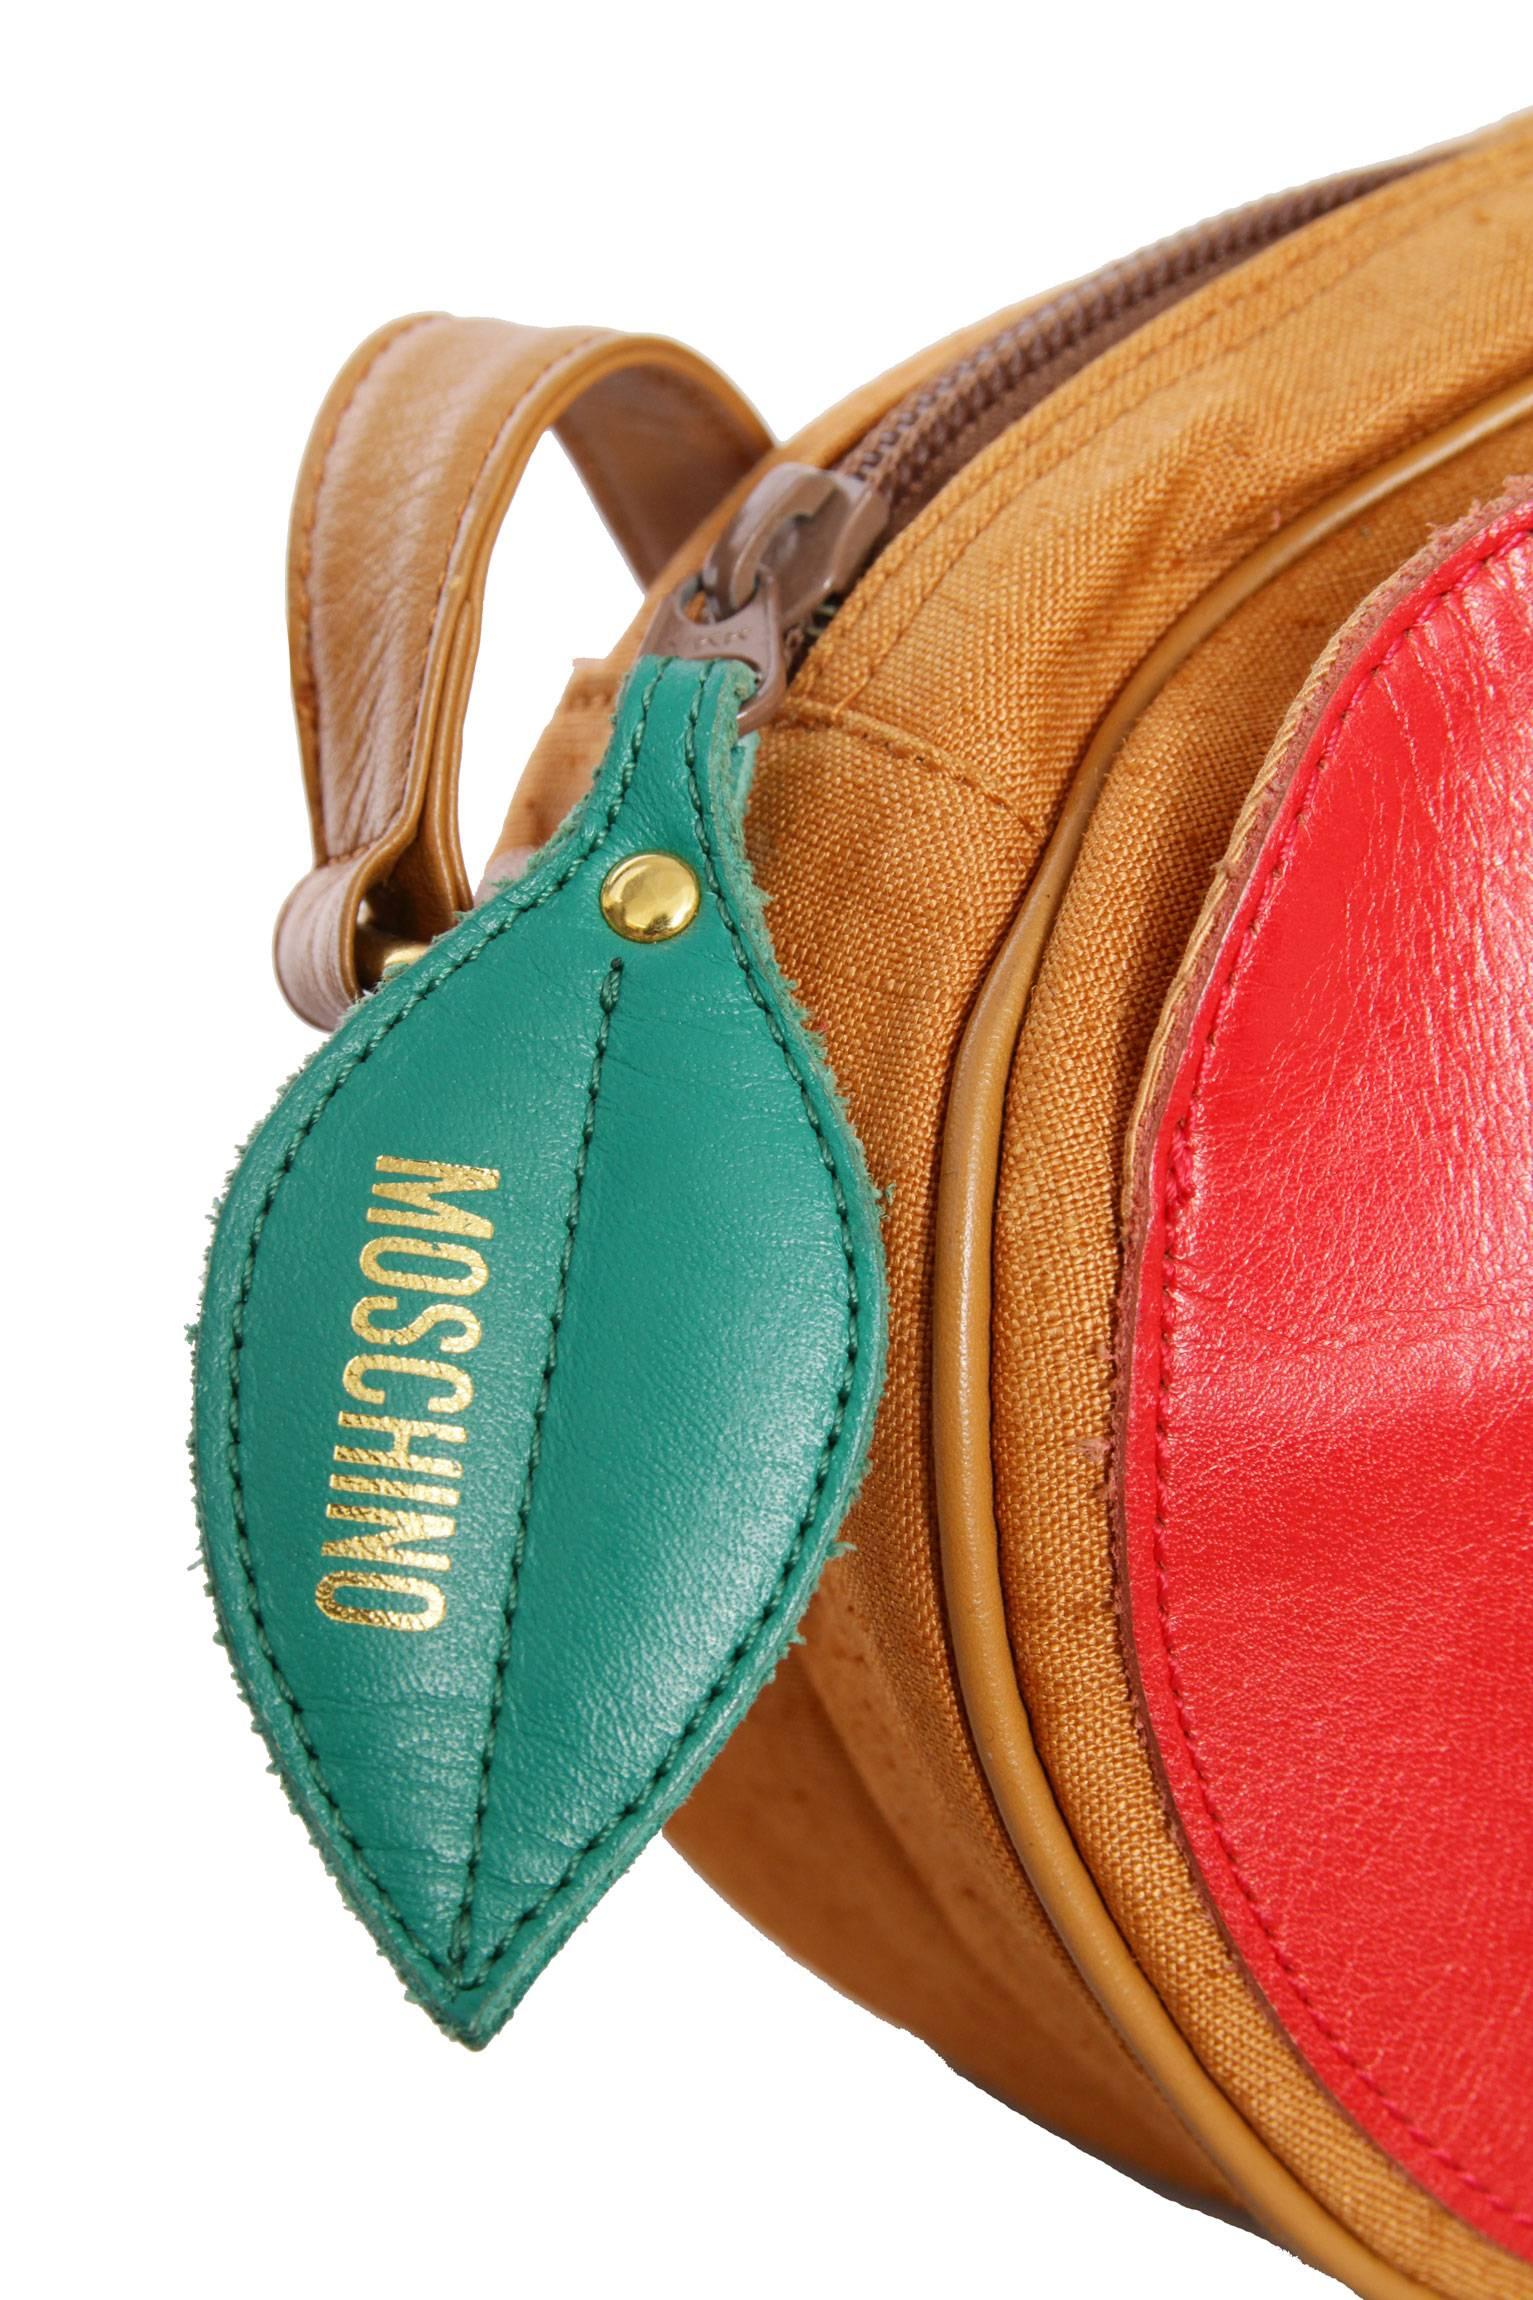 A quirky 1980s Moschino cross body pear shaped shoulder bag made in a light brown colored canvas and a leather strap. The bag has gold hardware and a large green leaf detail attached to the zipper closure, both have been stamped: Moschino.
Inside